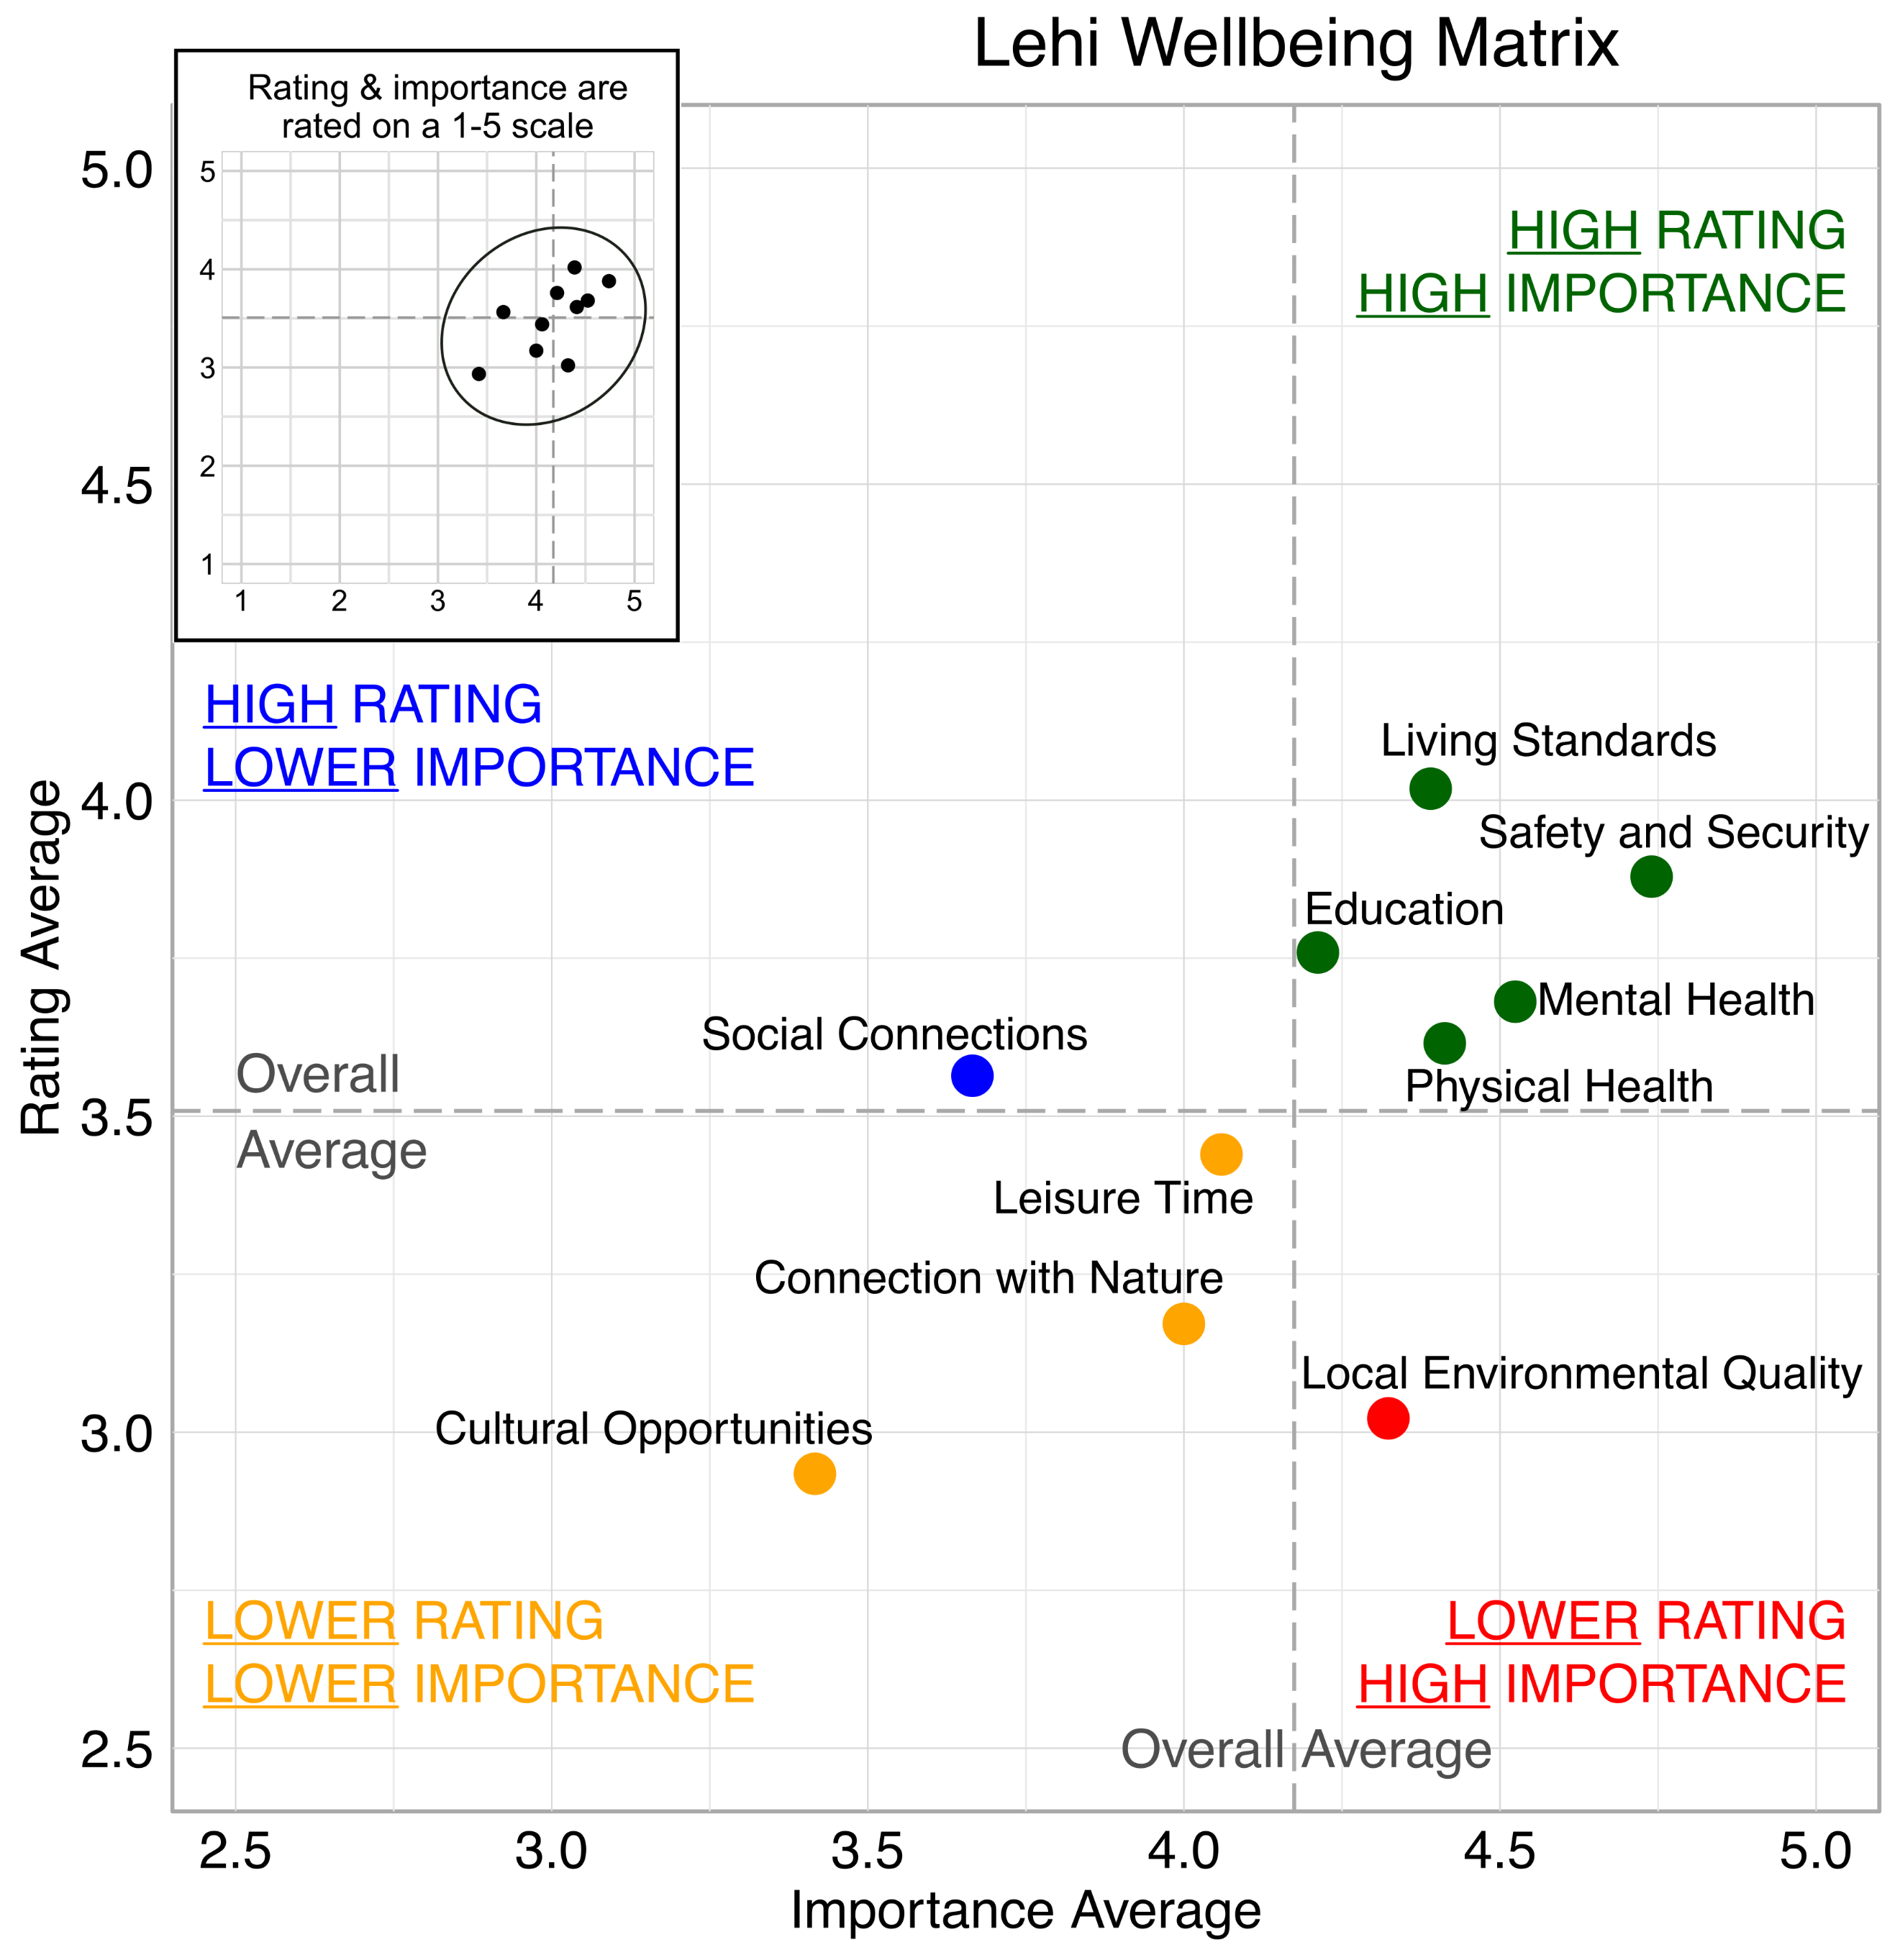 Scatterplot. Title: Lehi Wellbeing Matrix. Domains are classified into four quadrants depending on their average rating and average importance as compared to the average of all the average domain ratings and the average of all the average domain importance ratings. High rating, high importance (green quadrant) domains include: Safety and Security, Living Standards, Mental Health, Physical Health, and Education. High rating, lower Importance (blue quadrant) domains include: Social Connections. Lower rating, lower importance (yellow quadrant) domains include: Cultural Opportunities, Connection with Nature, and Leisure Time. Lower rating, high importance (red quadrant) domains include: Local Environmental Quality.